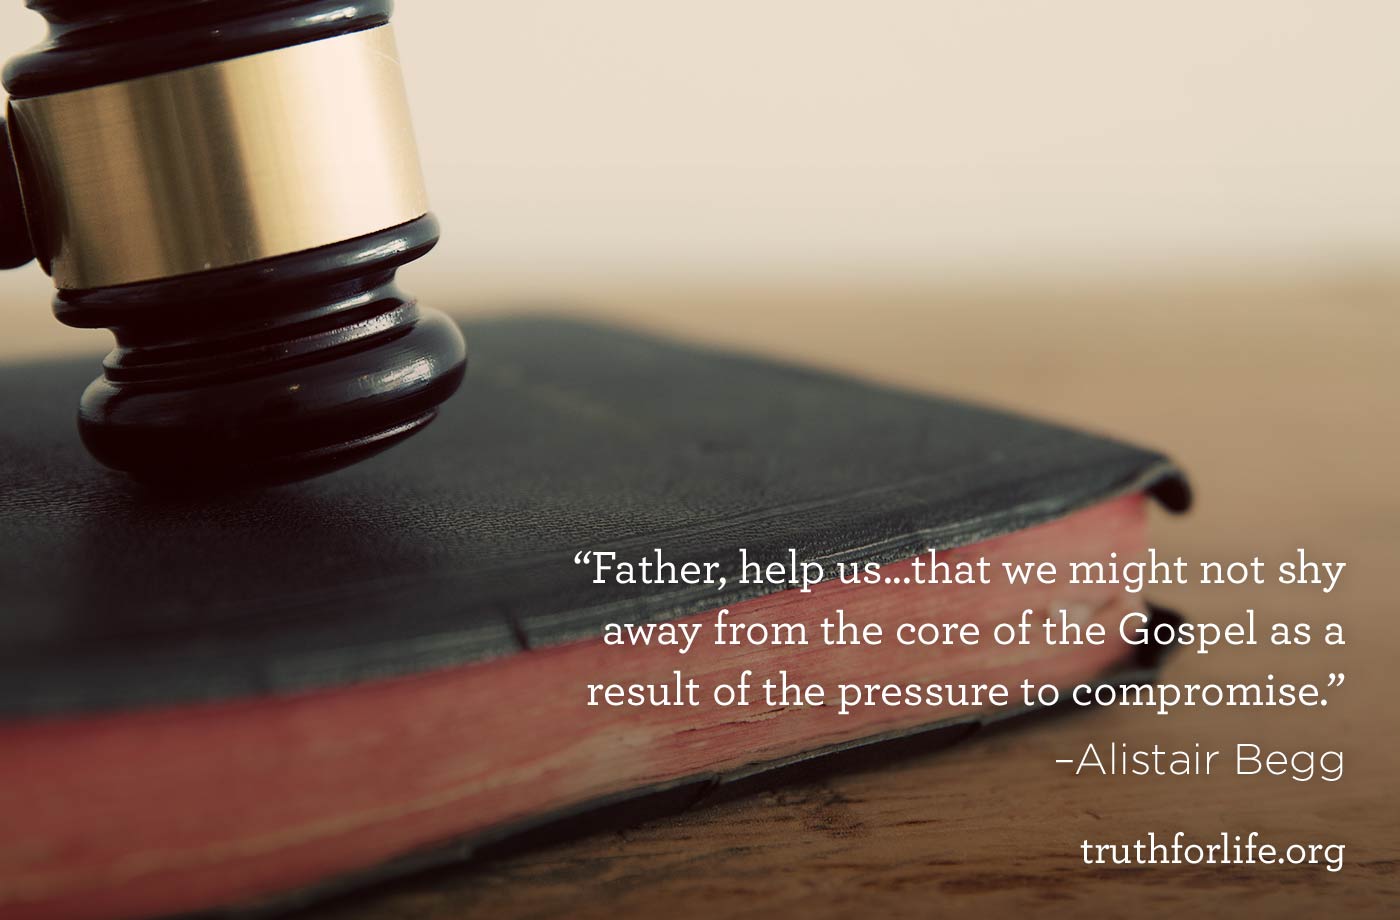 thumbnail image for Father help us that we might not compromise the Gospel